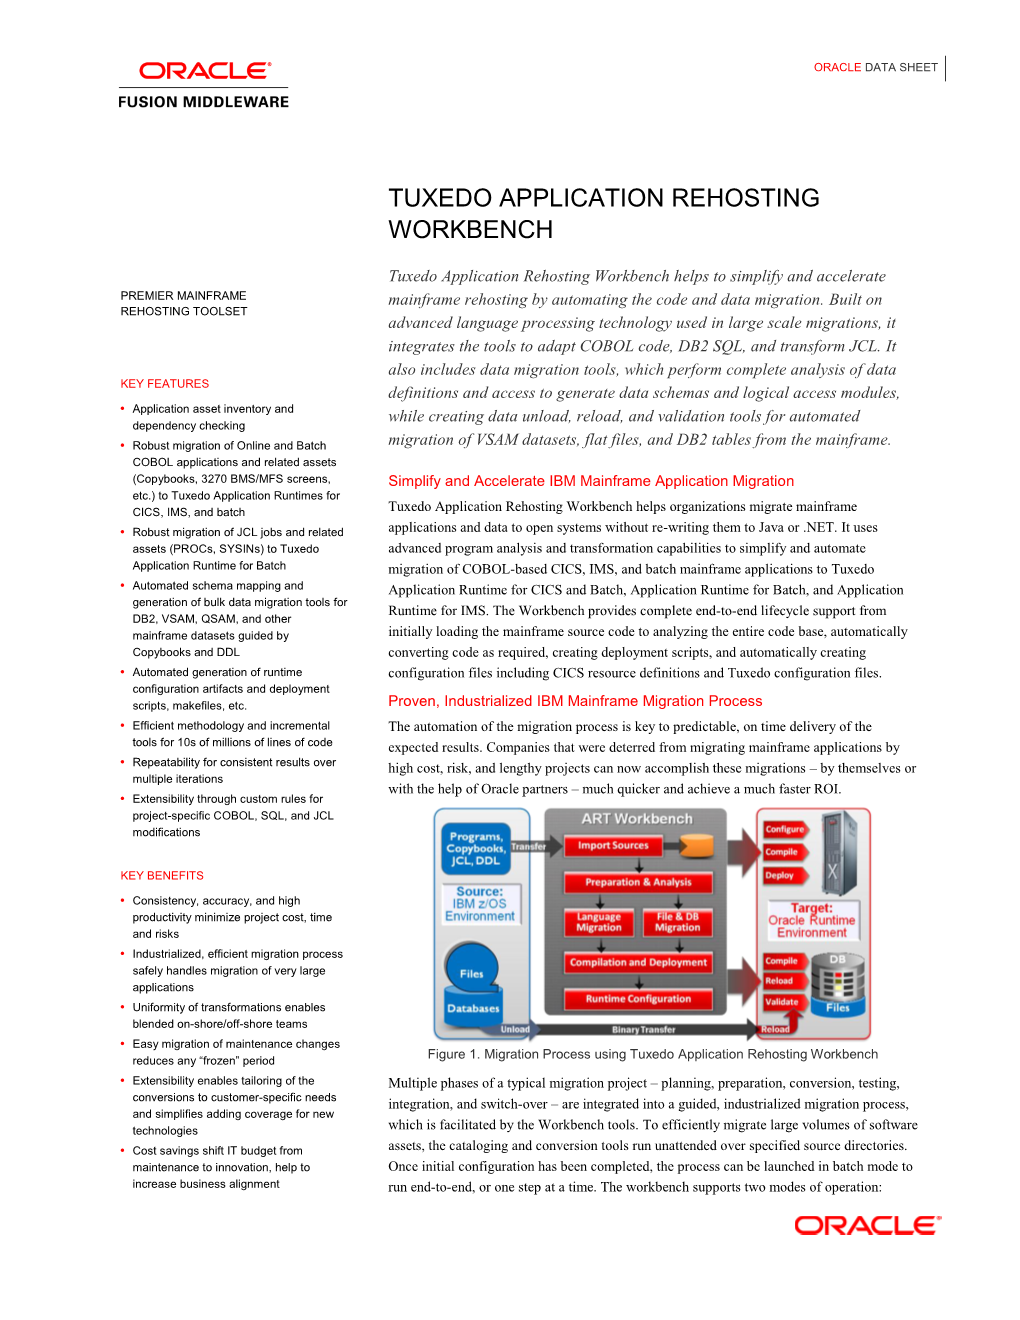 Tuxedo Application Rehosting Workbench Helps to Simplify and Accelerate PREMIER MAINFRAME Mainframe Rehosting by Automating the Code and Data Migration